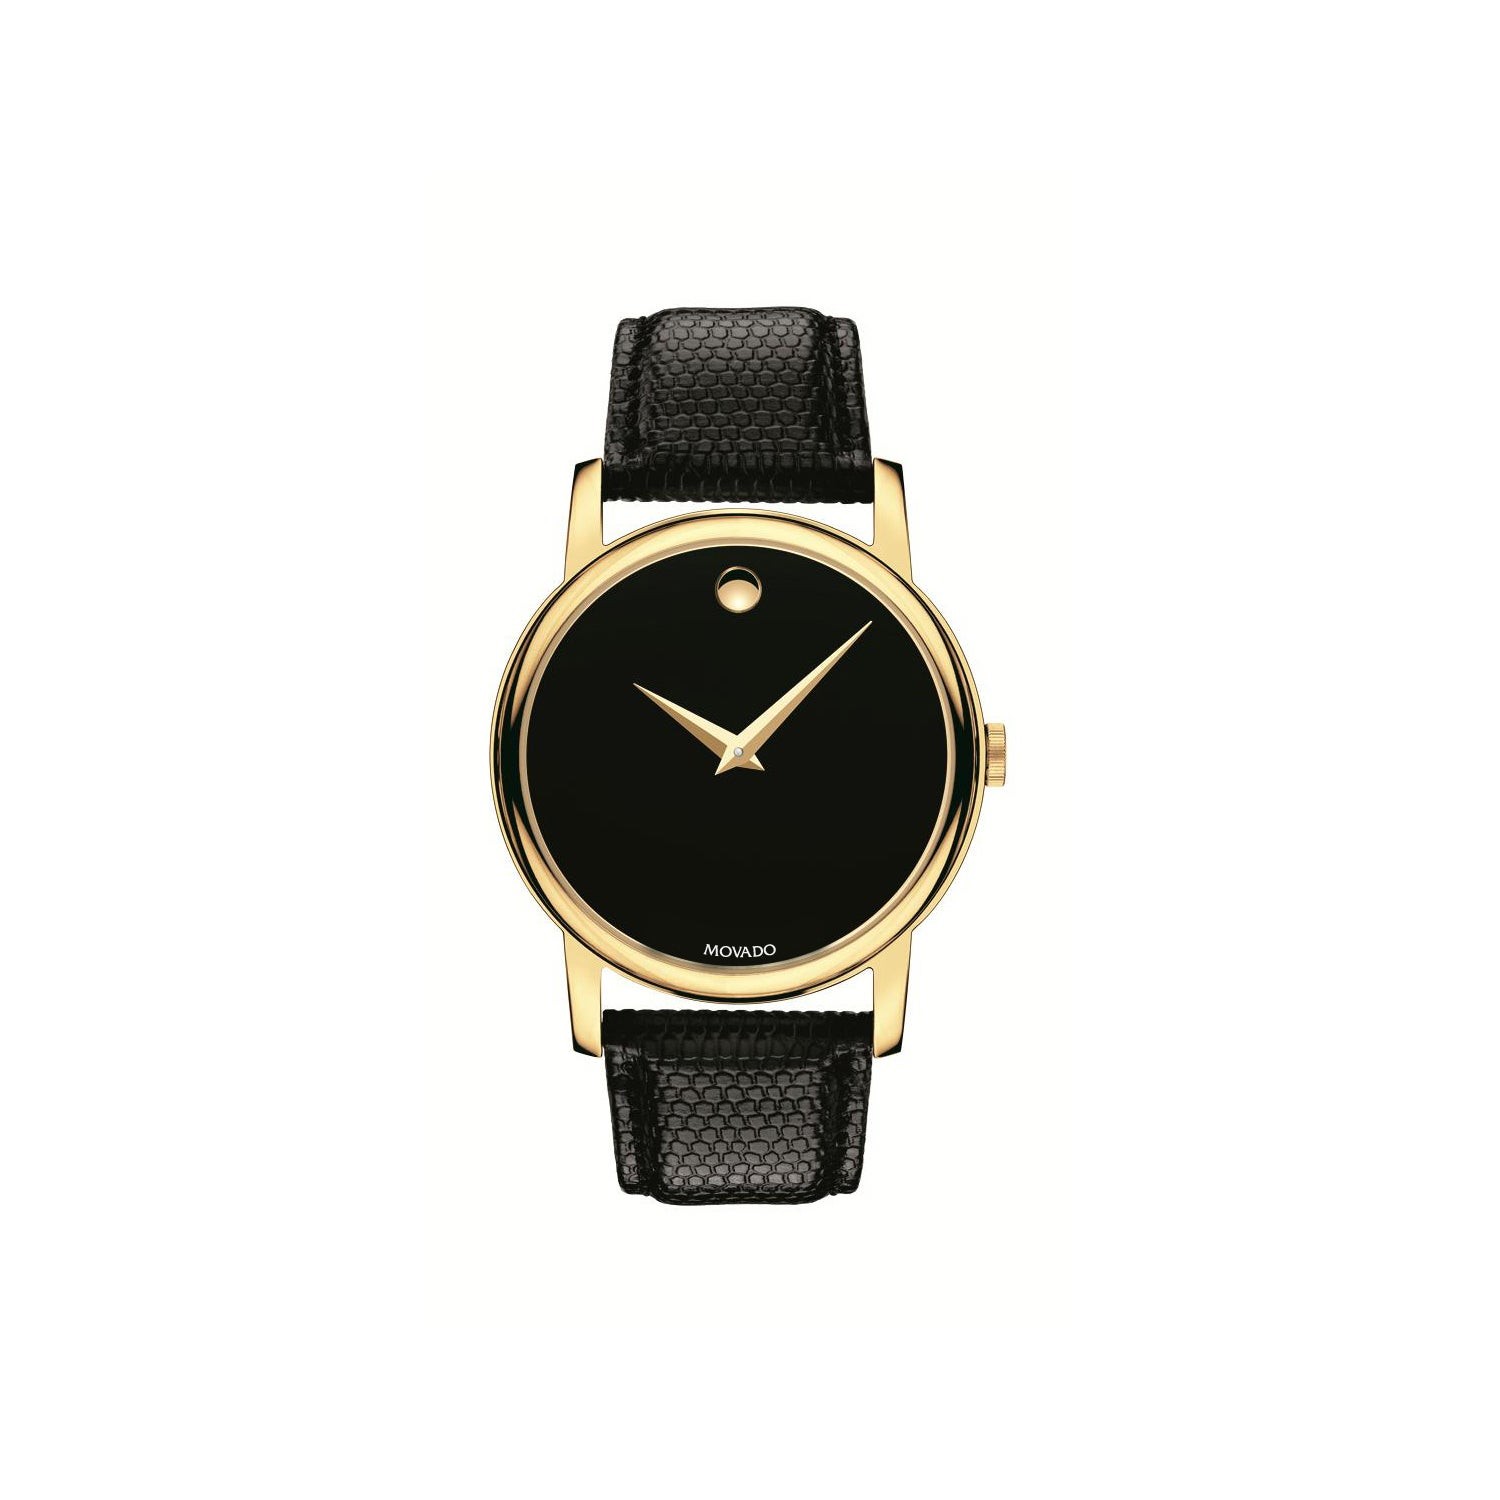 Mens Museum Classic Gold & Black Textured Leather Strap Watch Black Dial